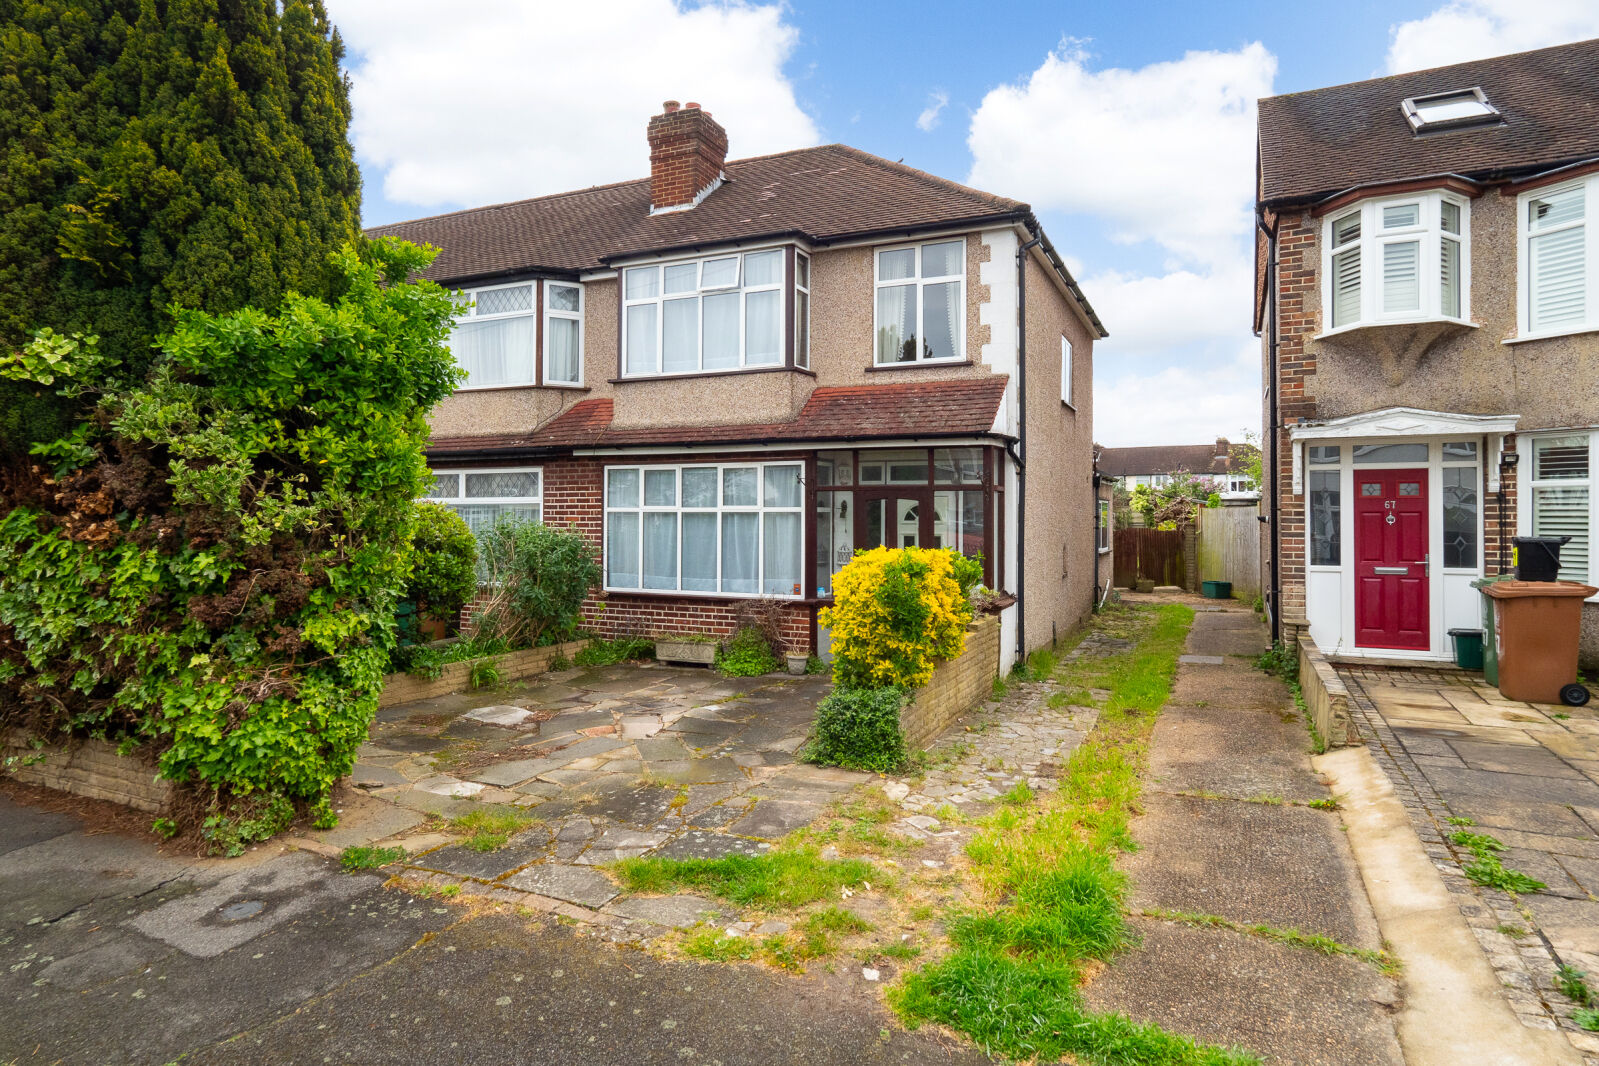 3 bedroom end terraced house for sale Brocks Drive, Cheam, SM3, main image